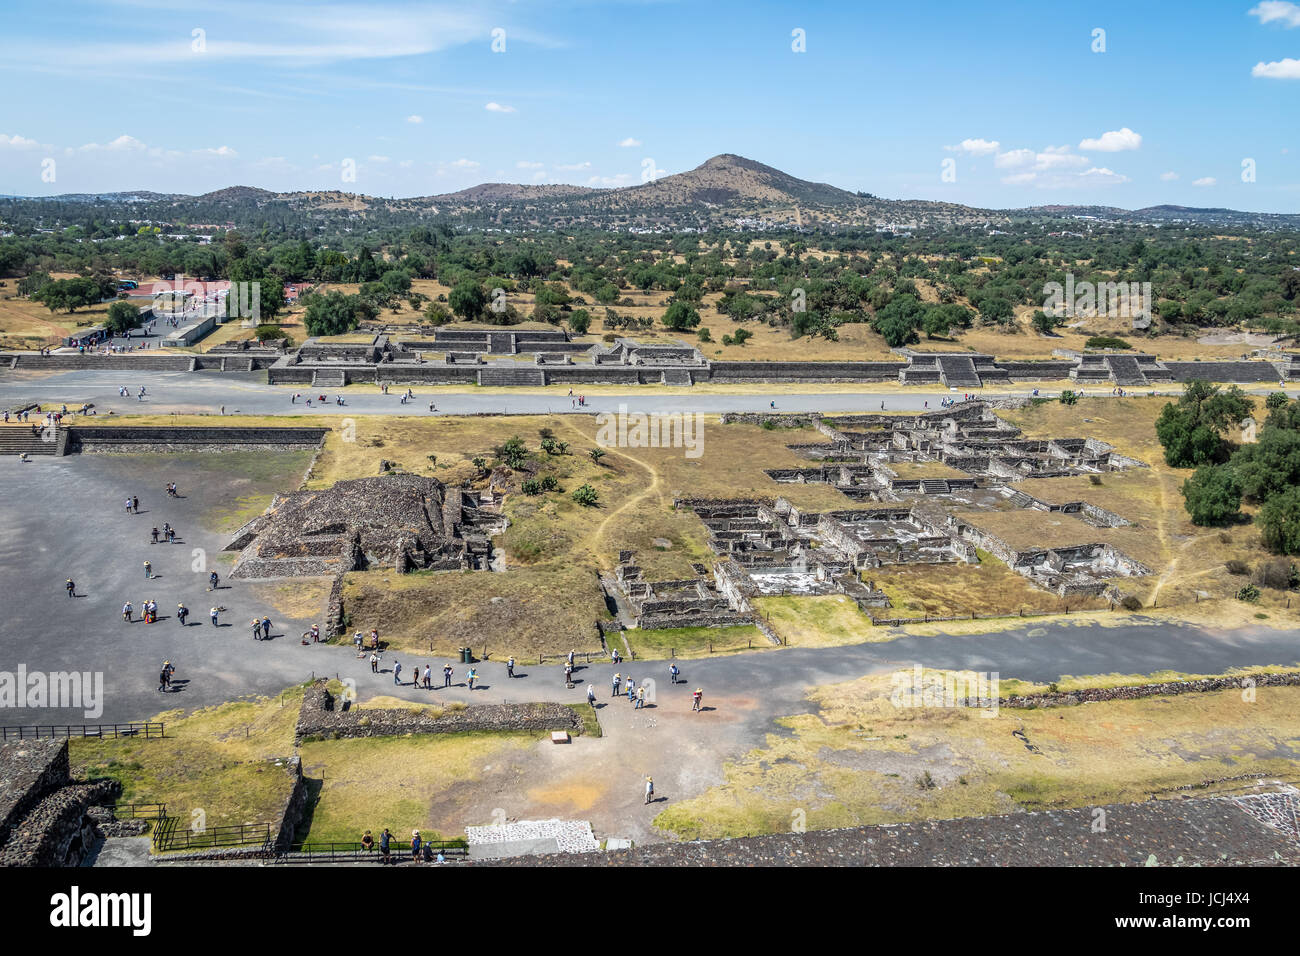 View from above of Teotihuacan Ruins - Mexico City, Mexico Stock Photo